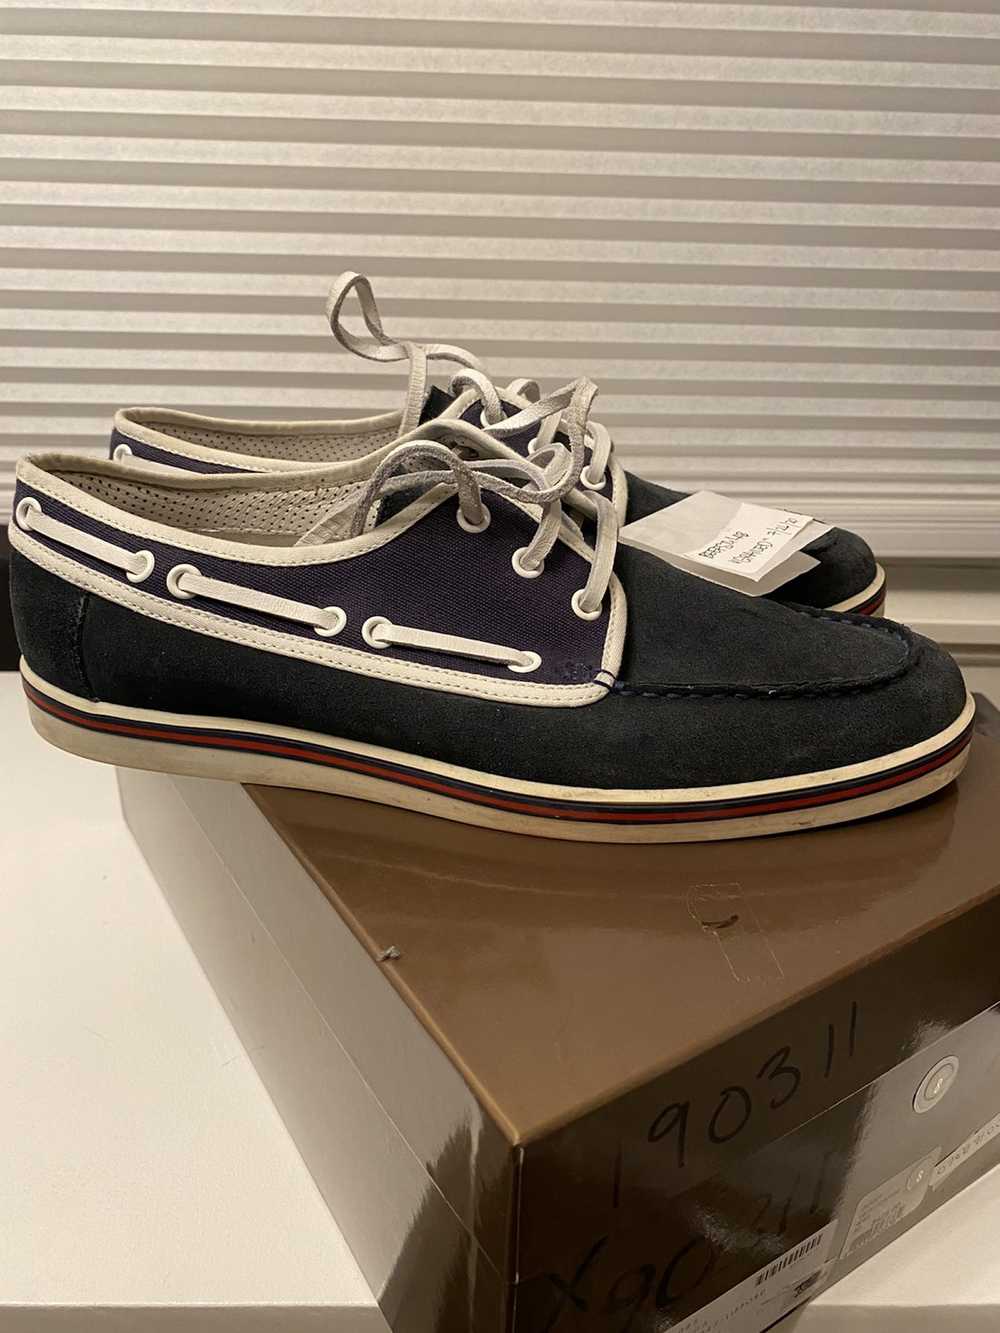 Gucci Boat Shoes - image 2